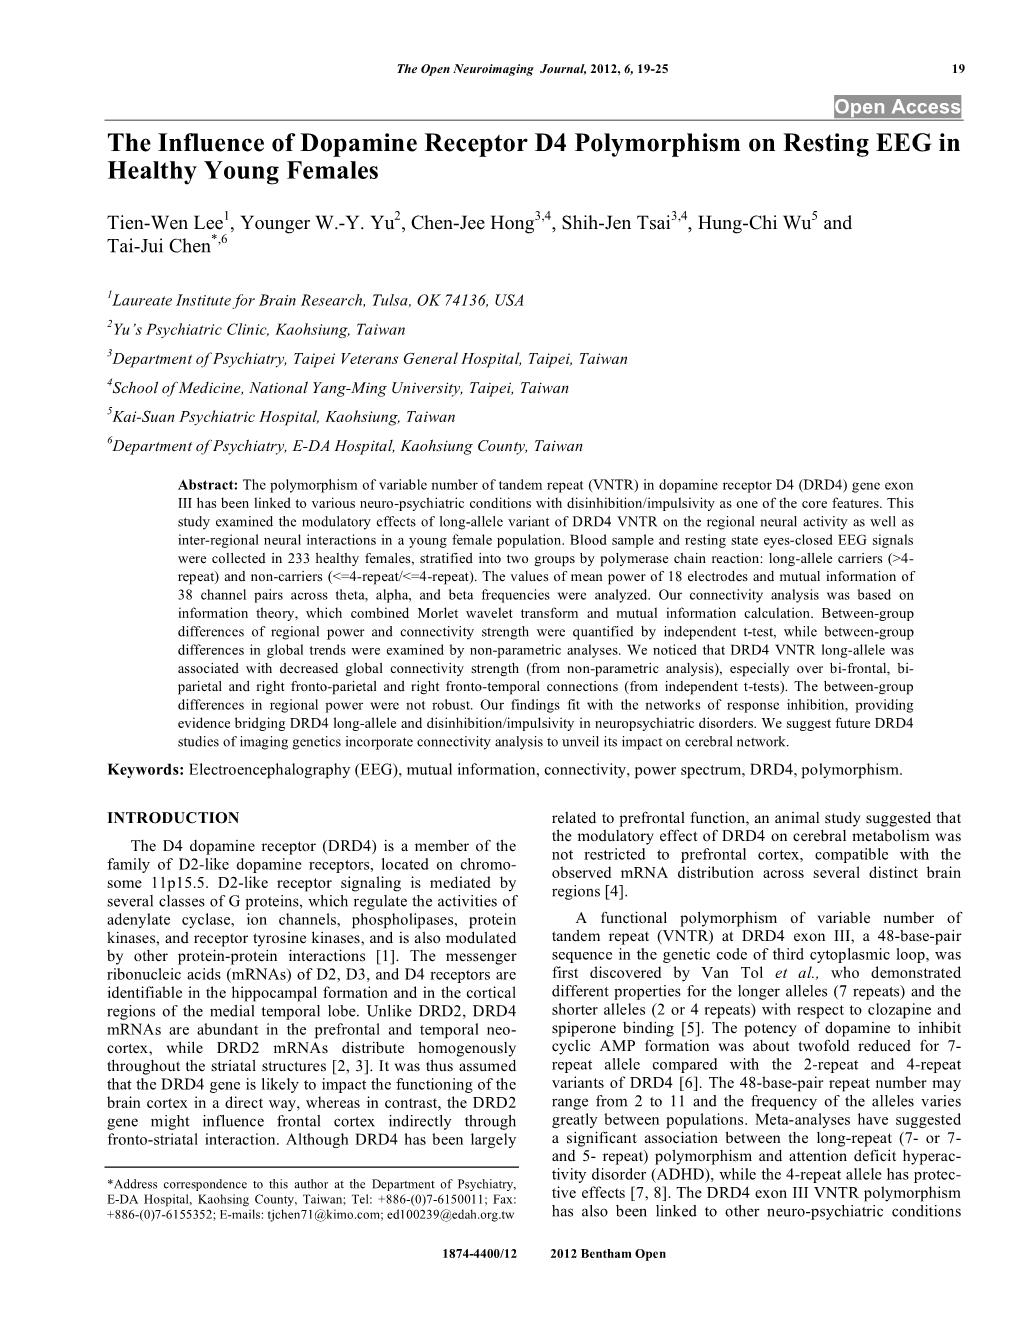 The Influence of Dopamine Receptor D4 Polymorphism on Resting EEG in Healthy Young Females